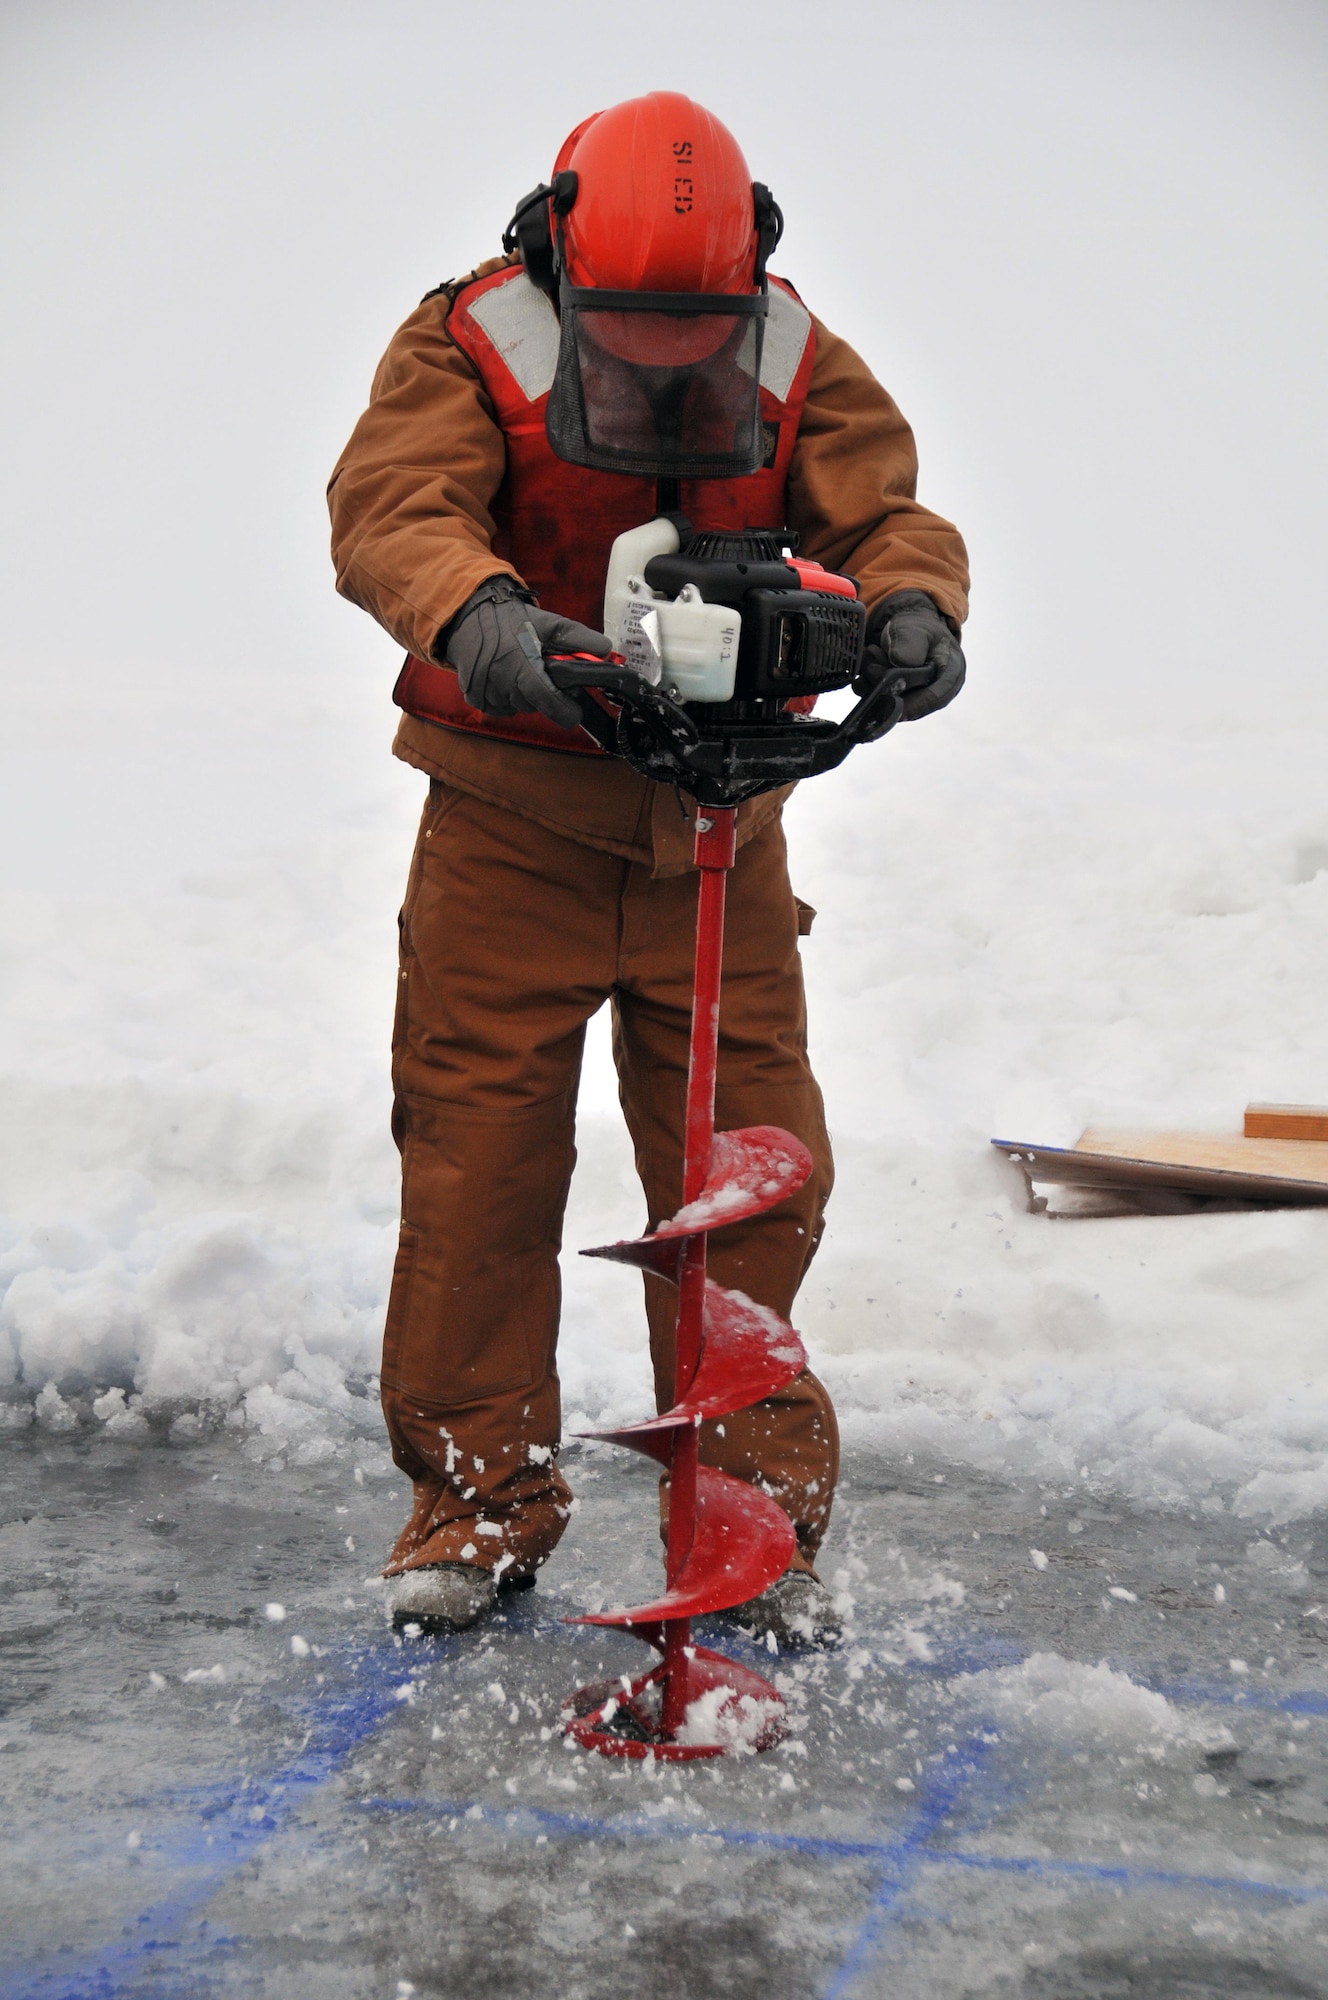 Senior Master Sgt. Gene Geren drills holes for blocks to be cut and removed during an Arctic oil spill response exercise Feb. 4, 2015, in Alaska. The removed blocks will open up a trench to deploy accumulation equipment to clean up a simulated spill. Members of the Alaska Department of Environmental Conservation, 611th Civil Engineer Squadron, U.S. Navy Supervisor of Salvage and Diving, and U.S. Coast Guardsmen participated in the exercise to learn Arctic spill response tactics and techniques. Geren is the 11th Air Force first sergeant. (U.S. Air Force photo/Tech. Sgt. John Gordinier)